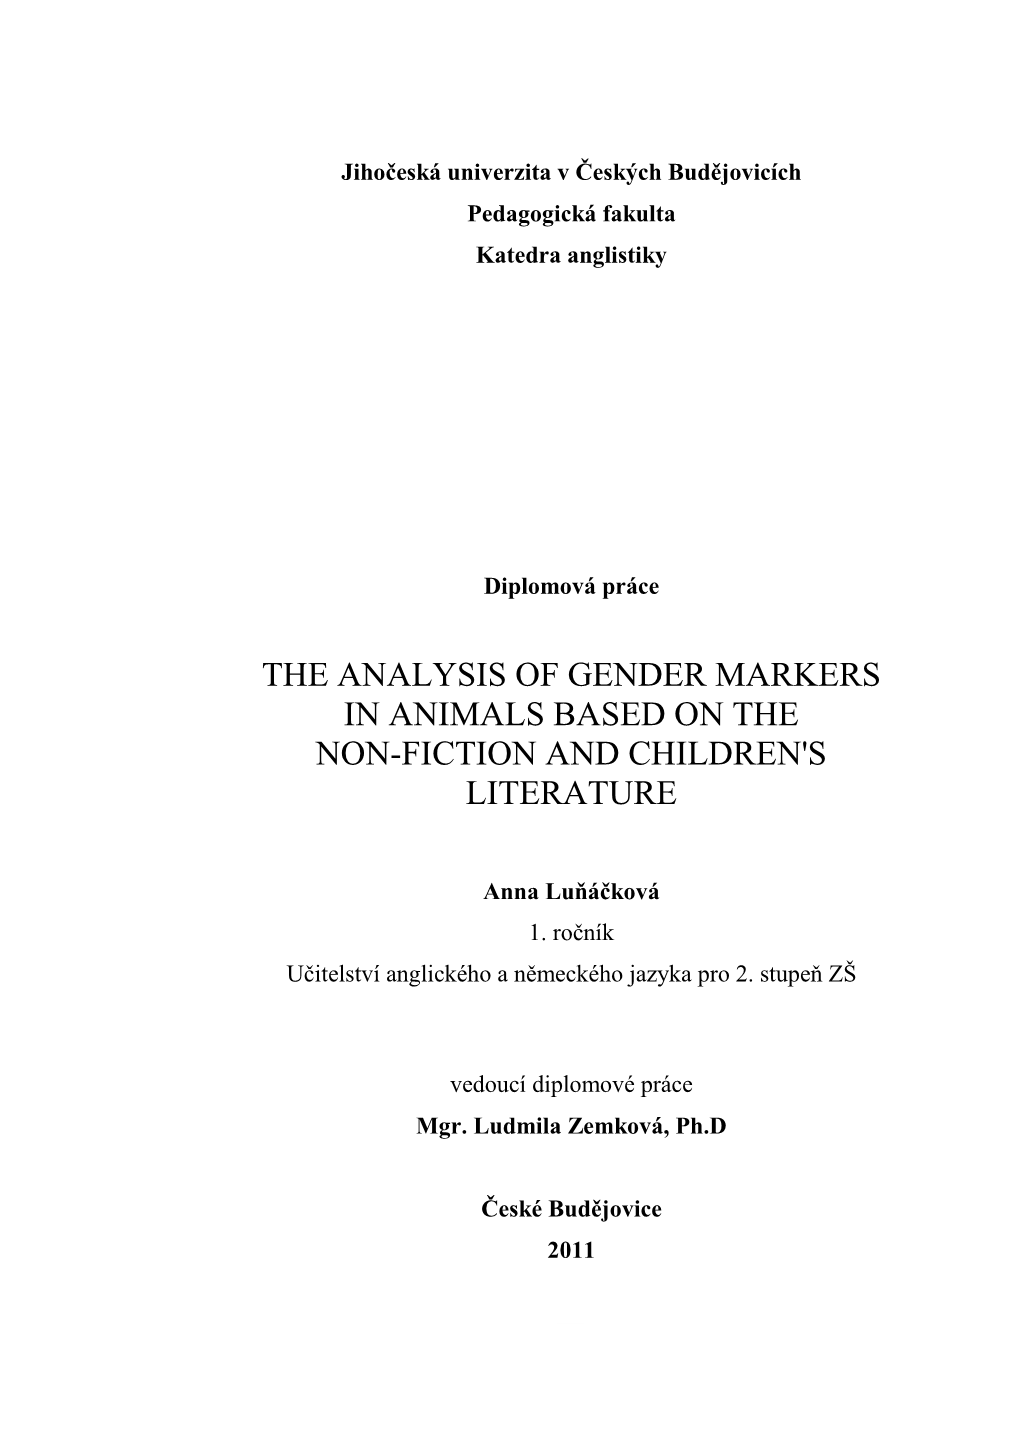 The Analysis of Gender Markers in Animals Based on the Non-Fiction and Children's Literature